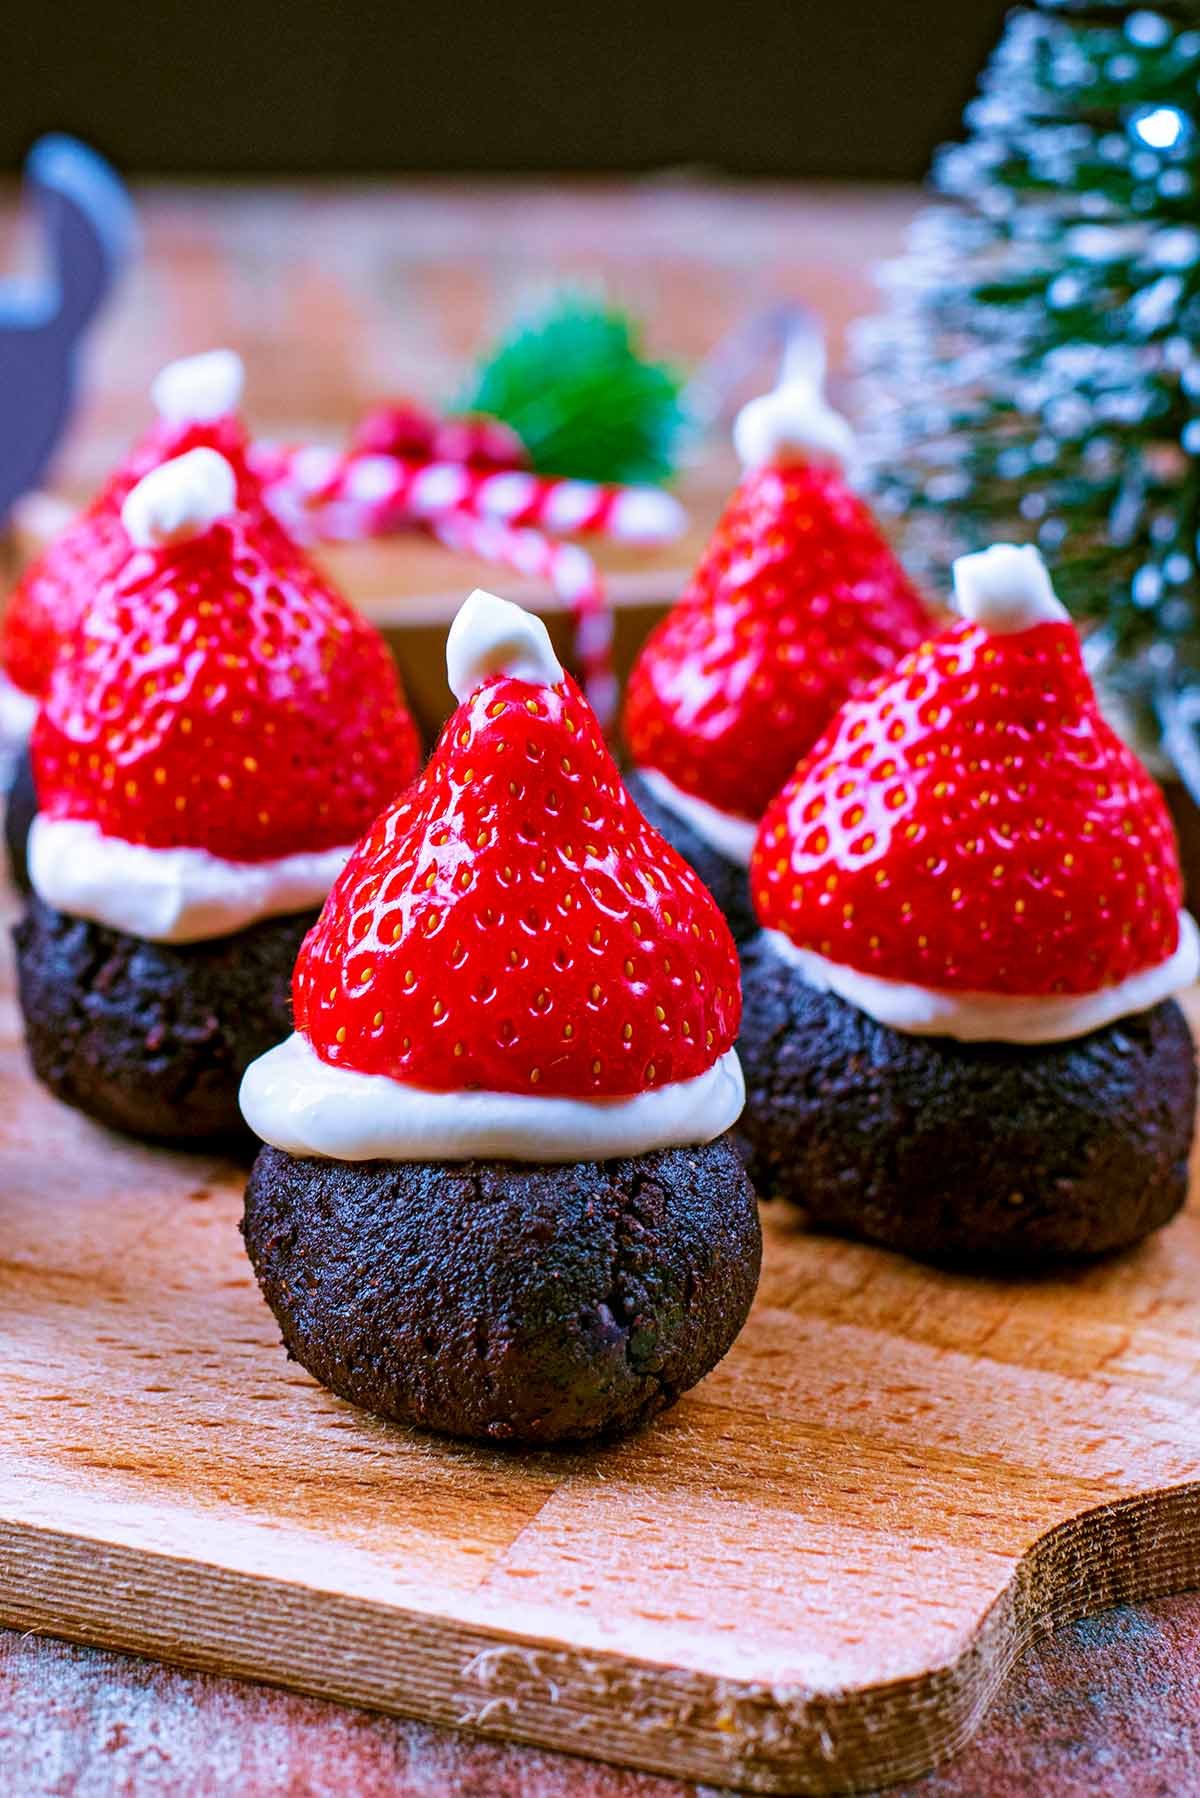 Strawberry topped brownies on a wooden serving board with Christmas decorations in the background.